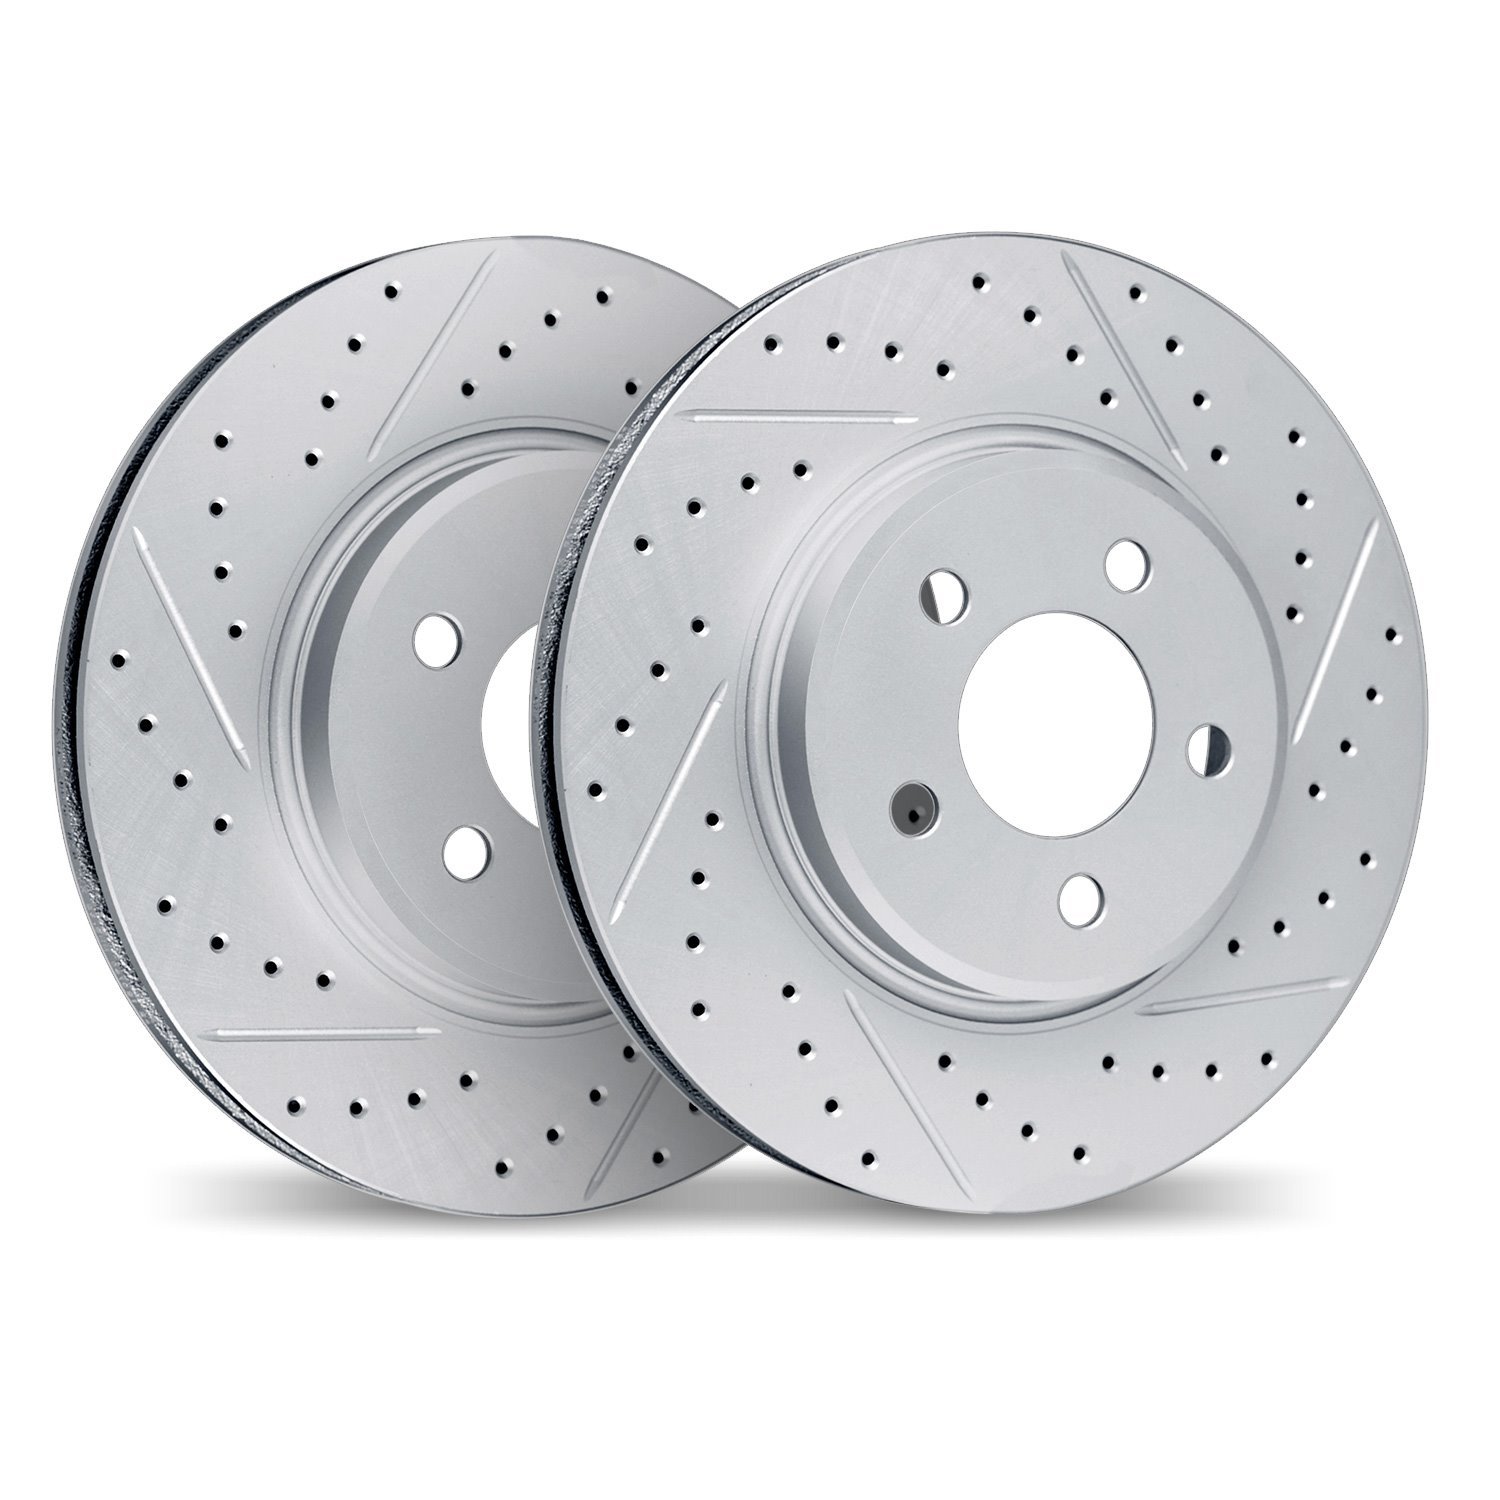 2002-31352 Geoperformance Drilled/Slotted Brake Rotors, Fits Select BMW, Position: Front